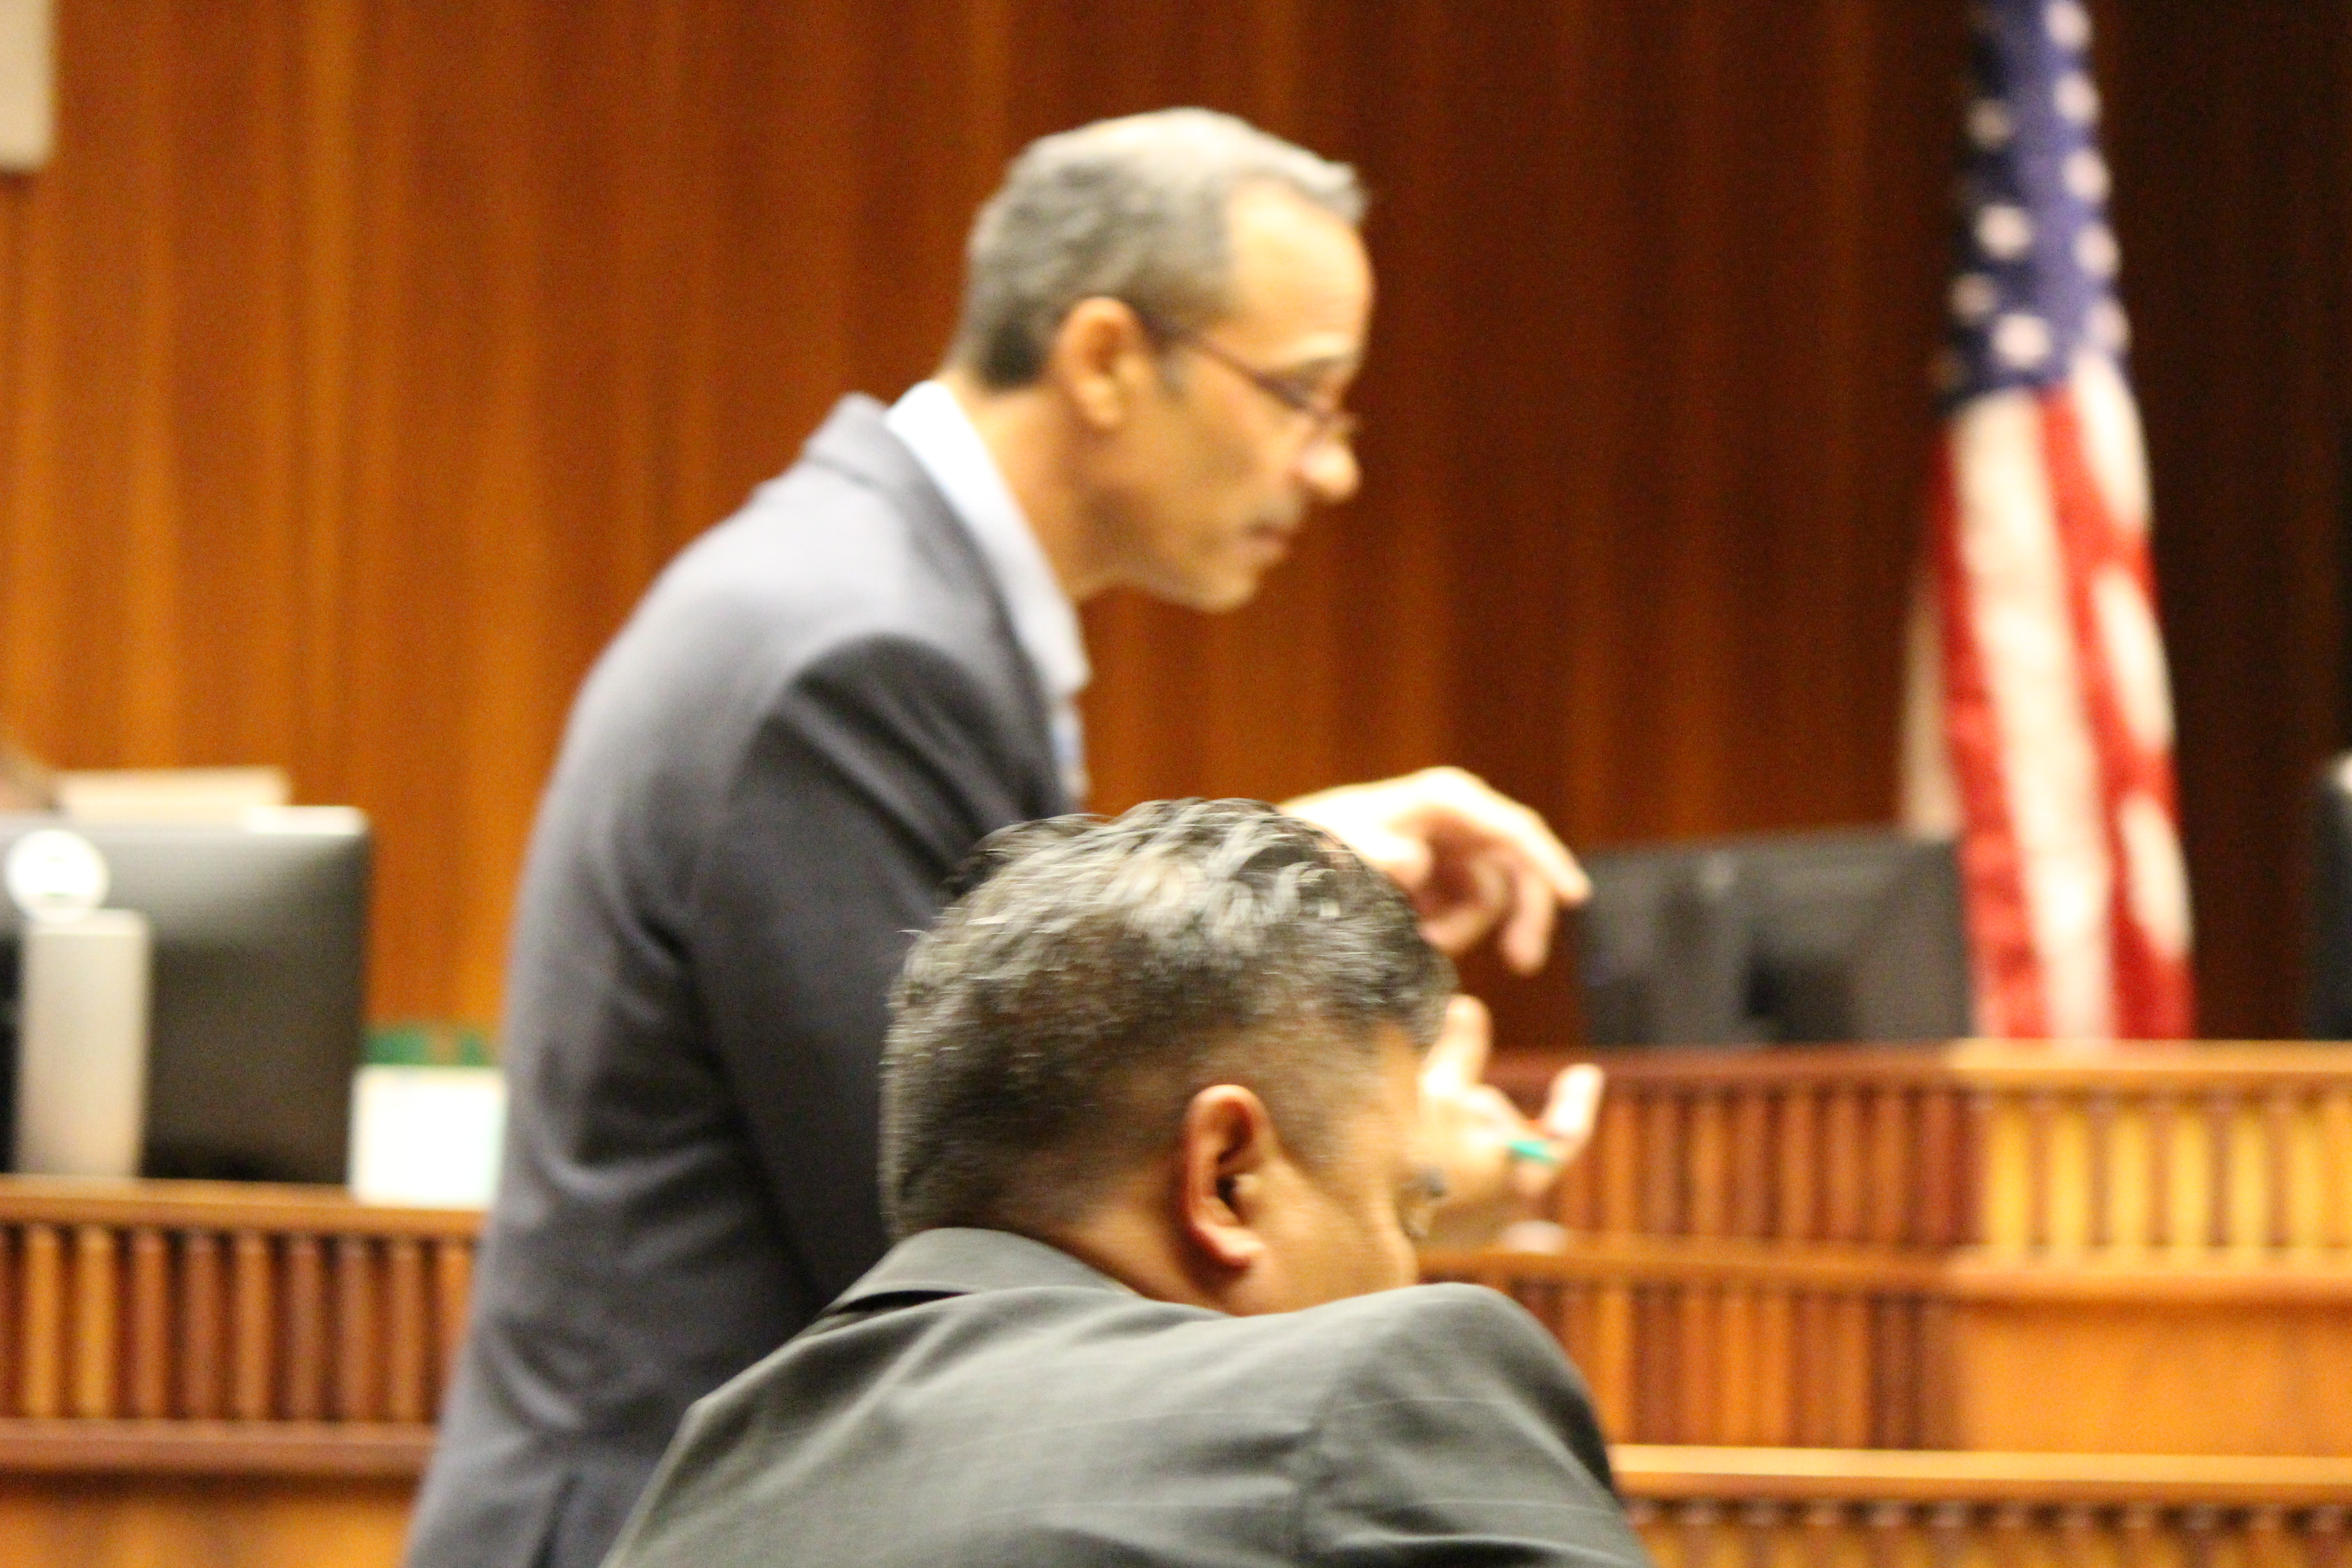 State v Capobianco trail. Defense Attorney Jon Apo with Prosecuting Attorney Robert Rivera in the foreground. PC: 11.30.16 by Wendy Osher.